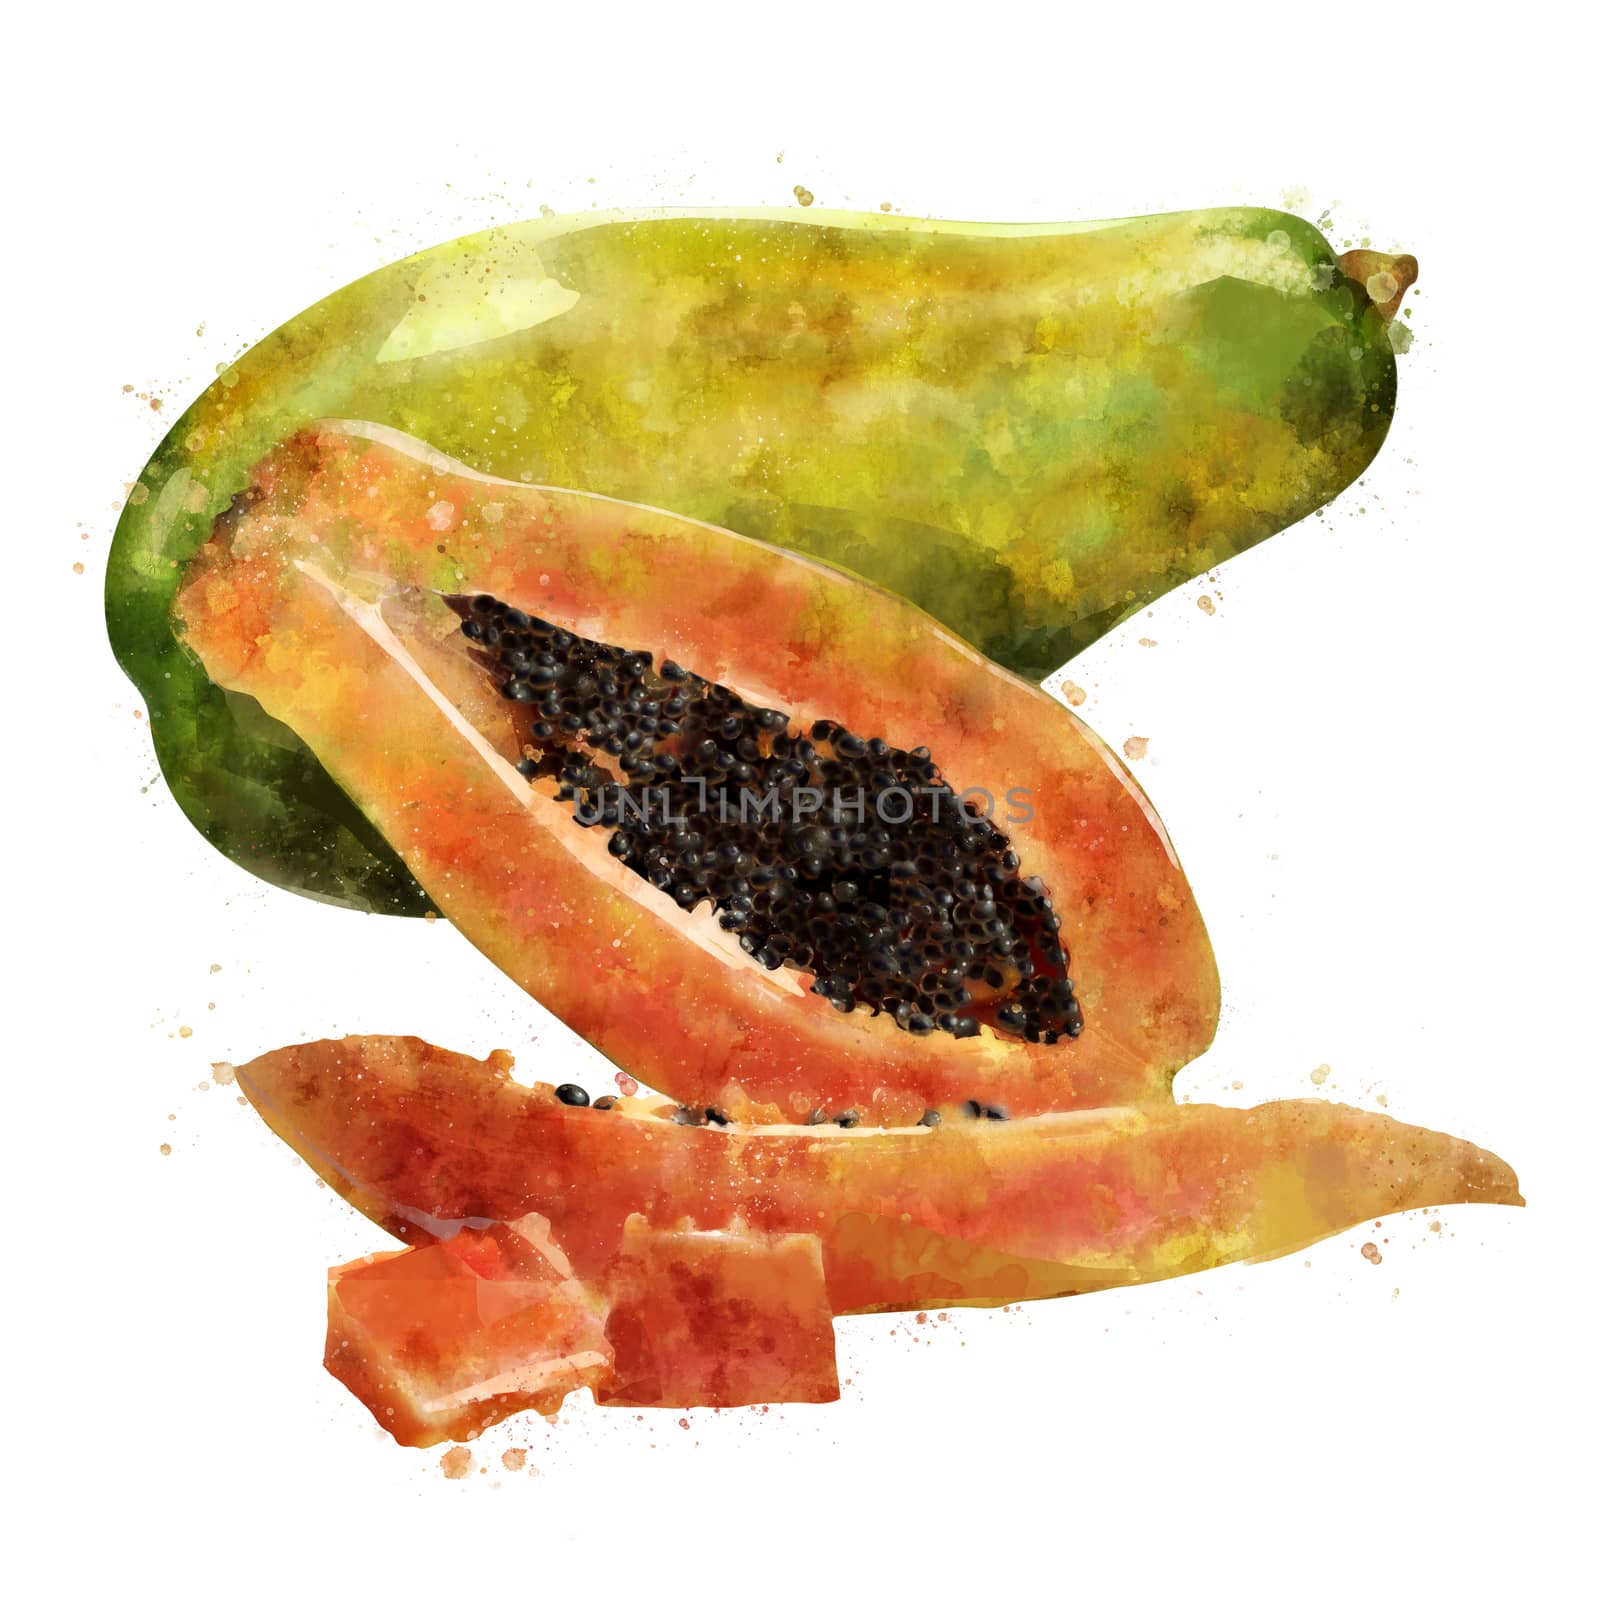 Papaya on white background. Watercolor illustration by ConceptCafe